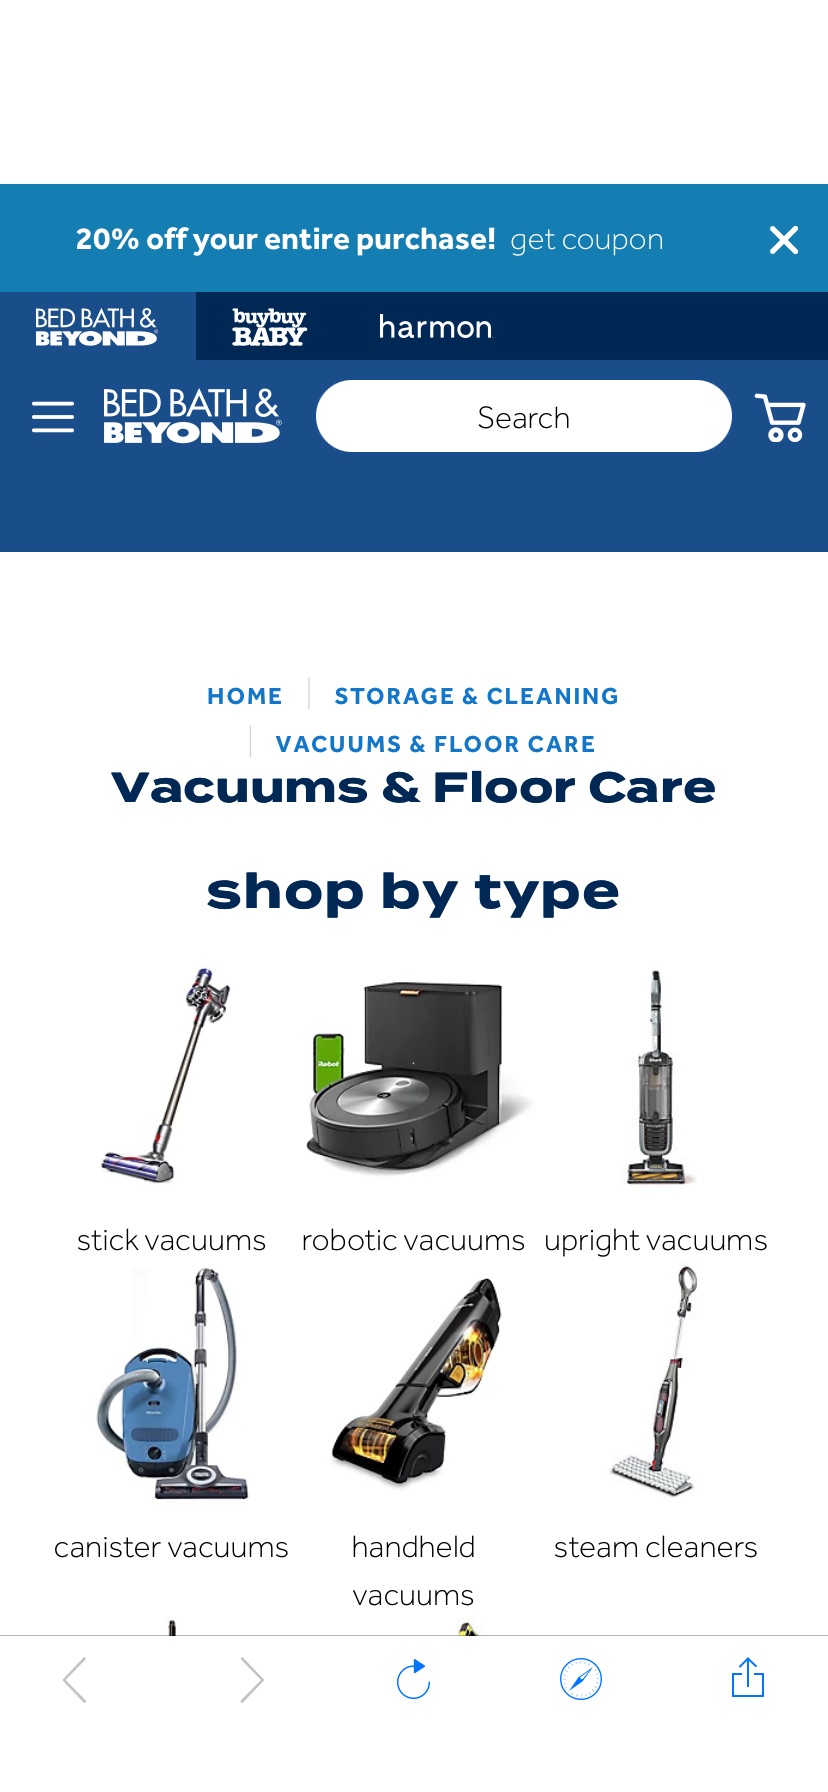 Save up to $200 on vacuums + up to 50% off storage + 20% off TOTAL purchase coupon